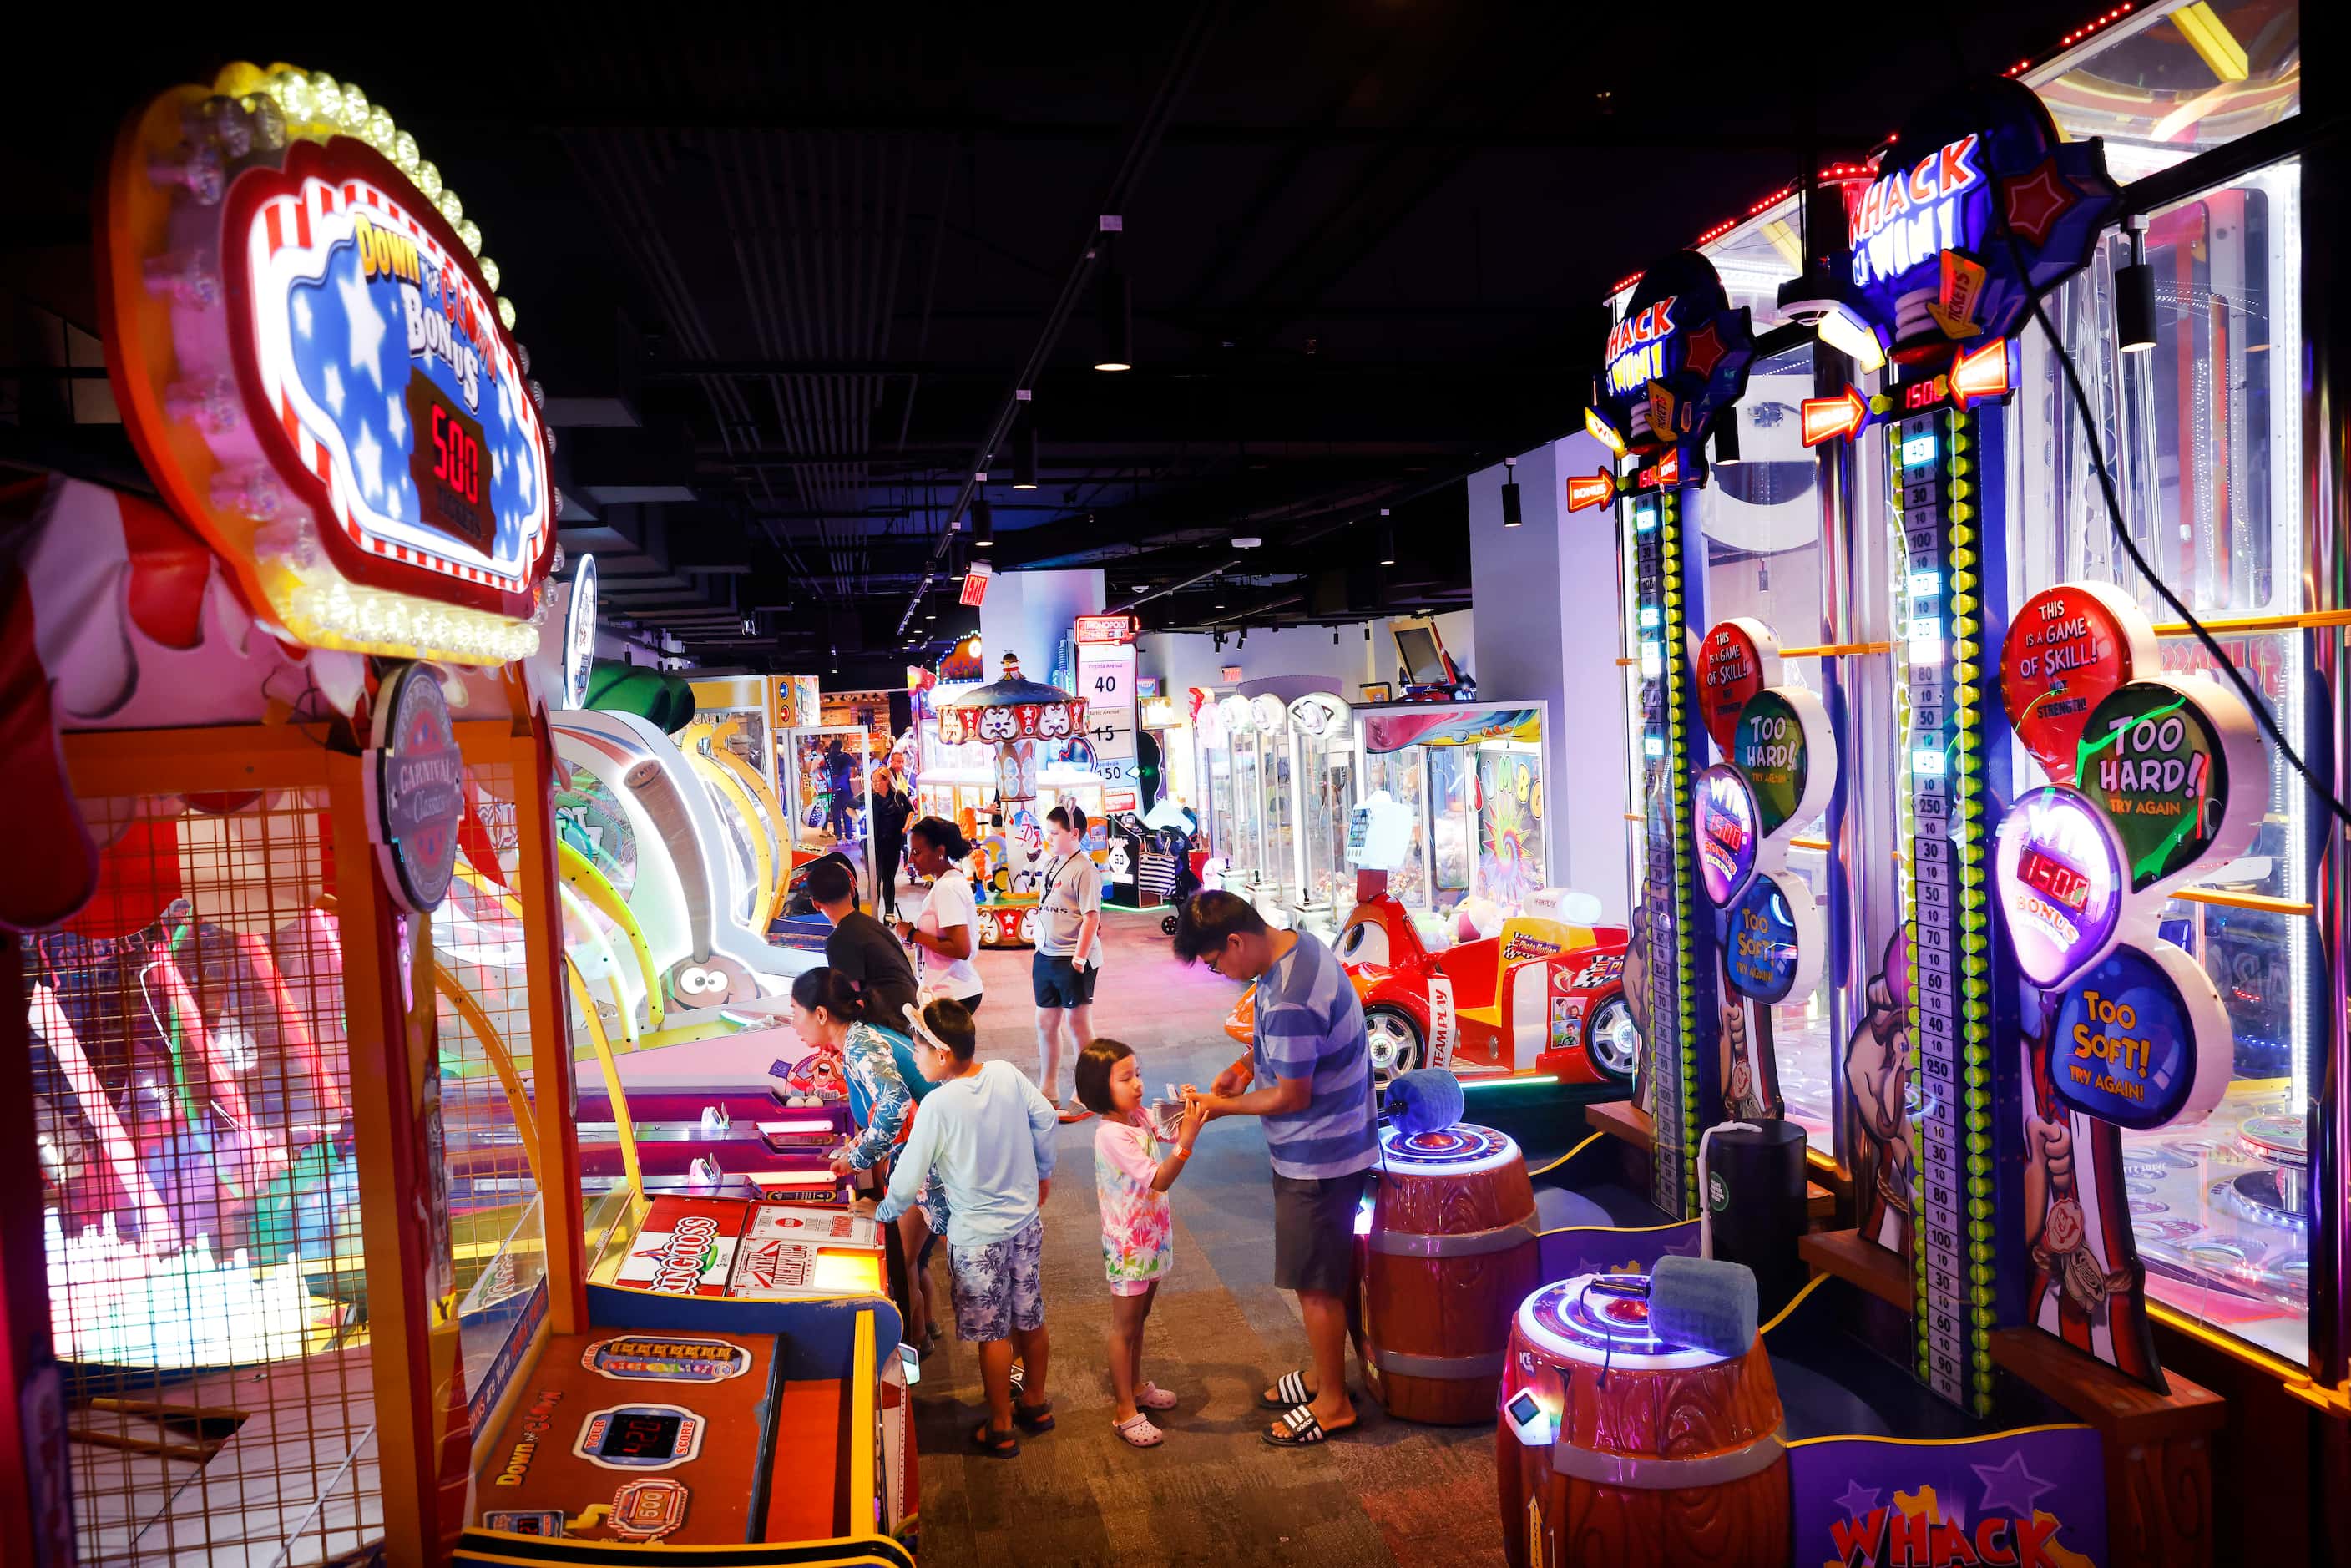 While renovation and construction continues at Great Wolf Lodge the arcade has been...